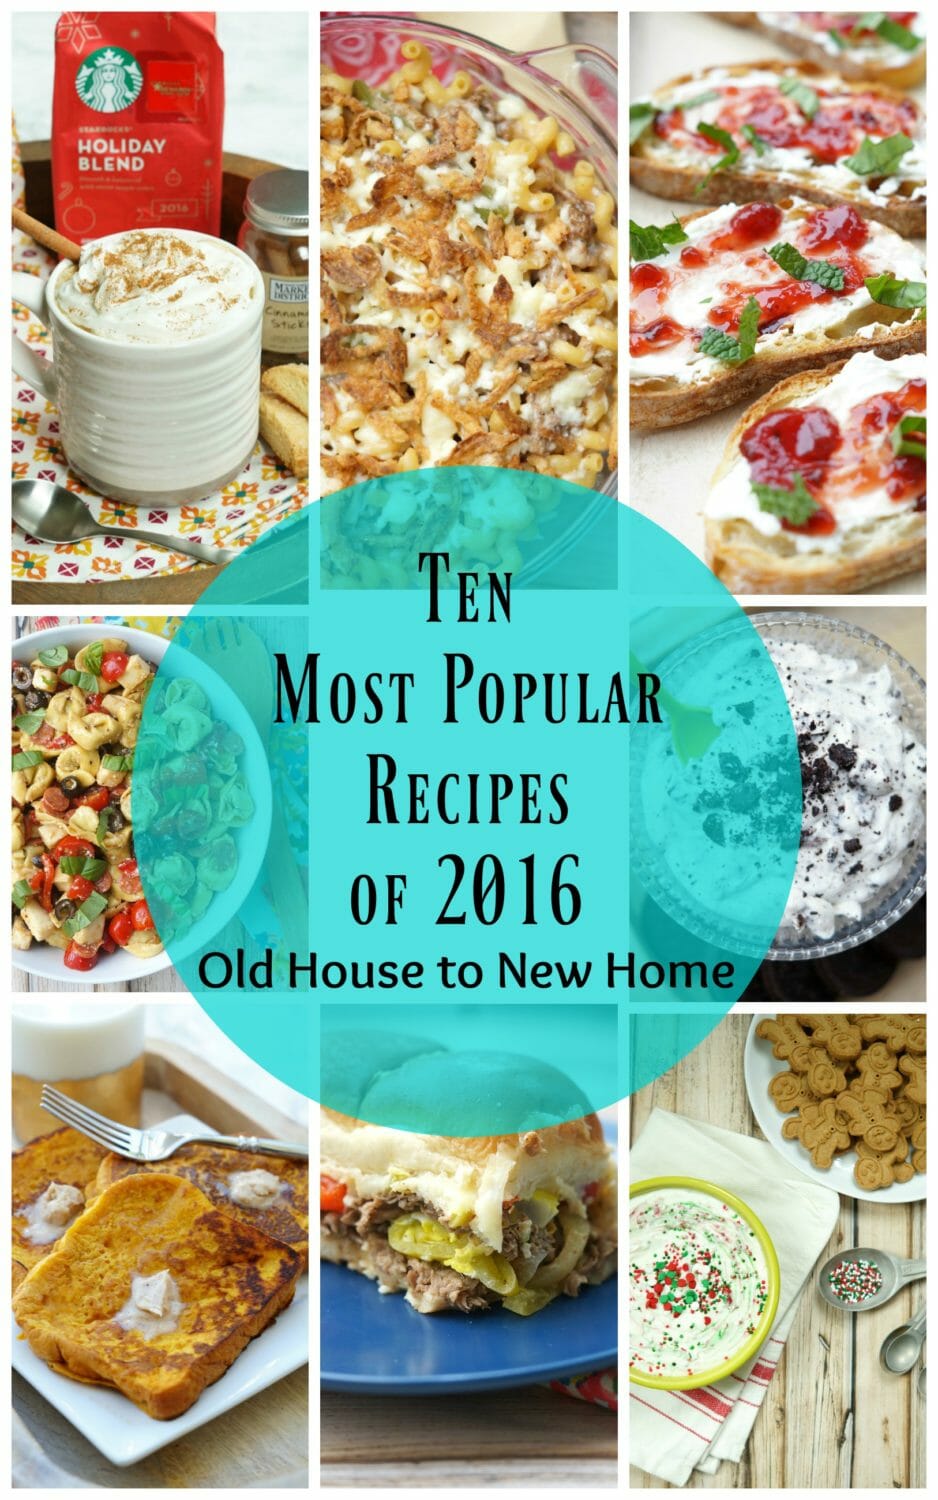 Old House to New Home's 10 Best Recipes of 2016!